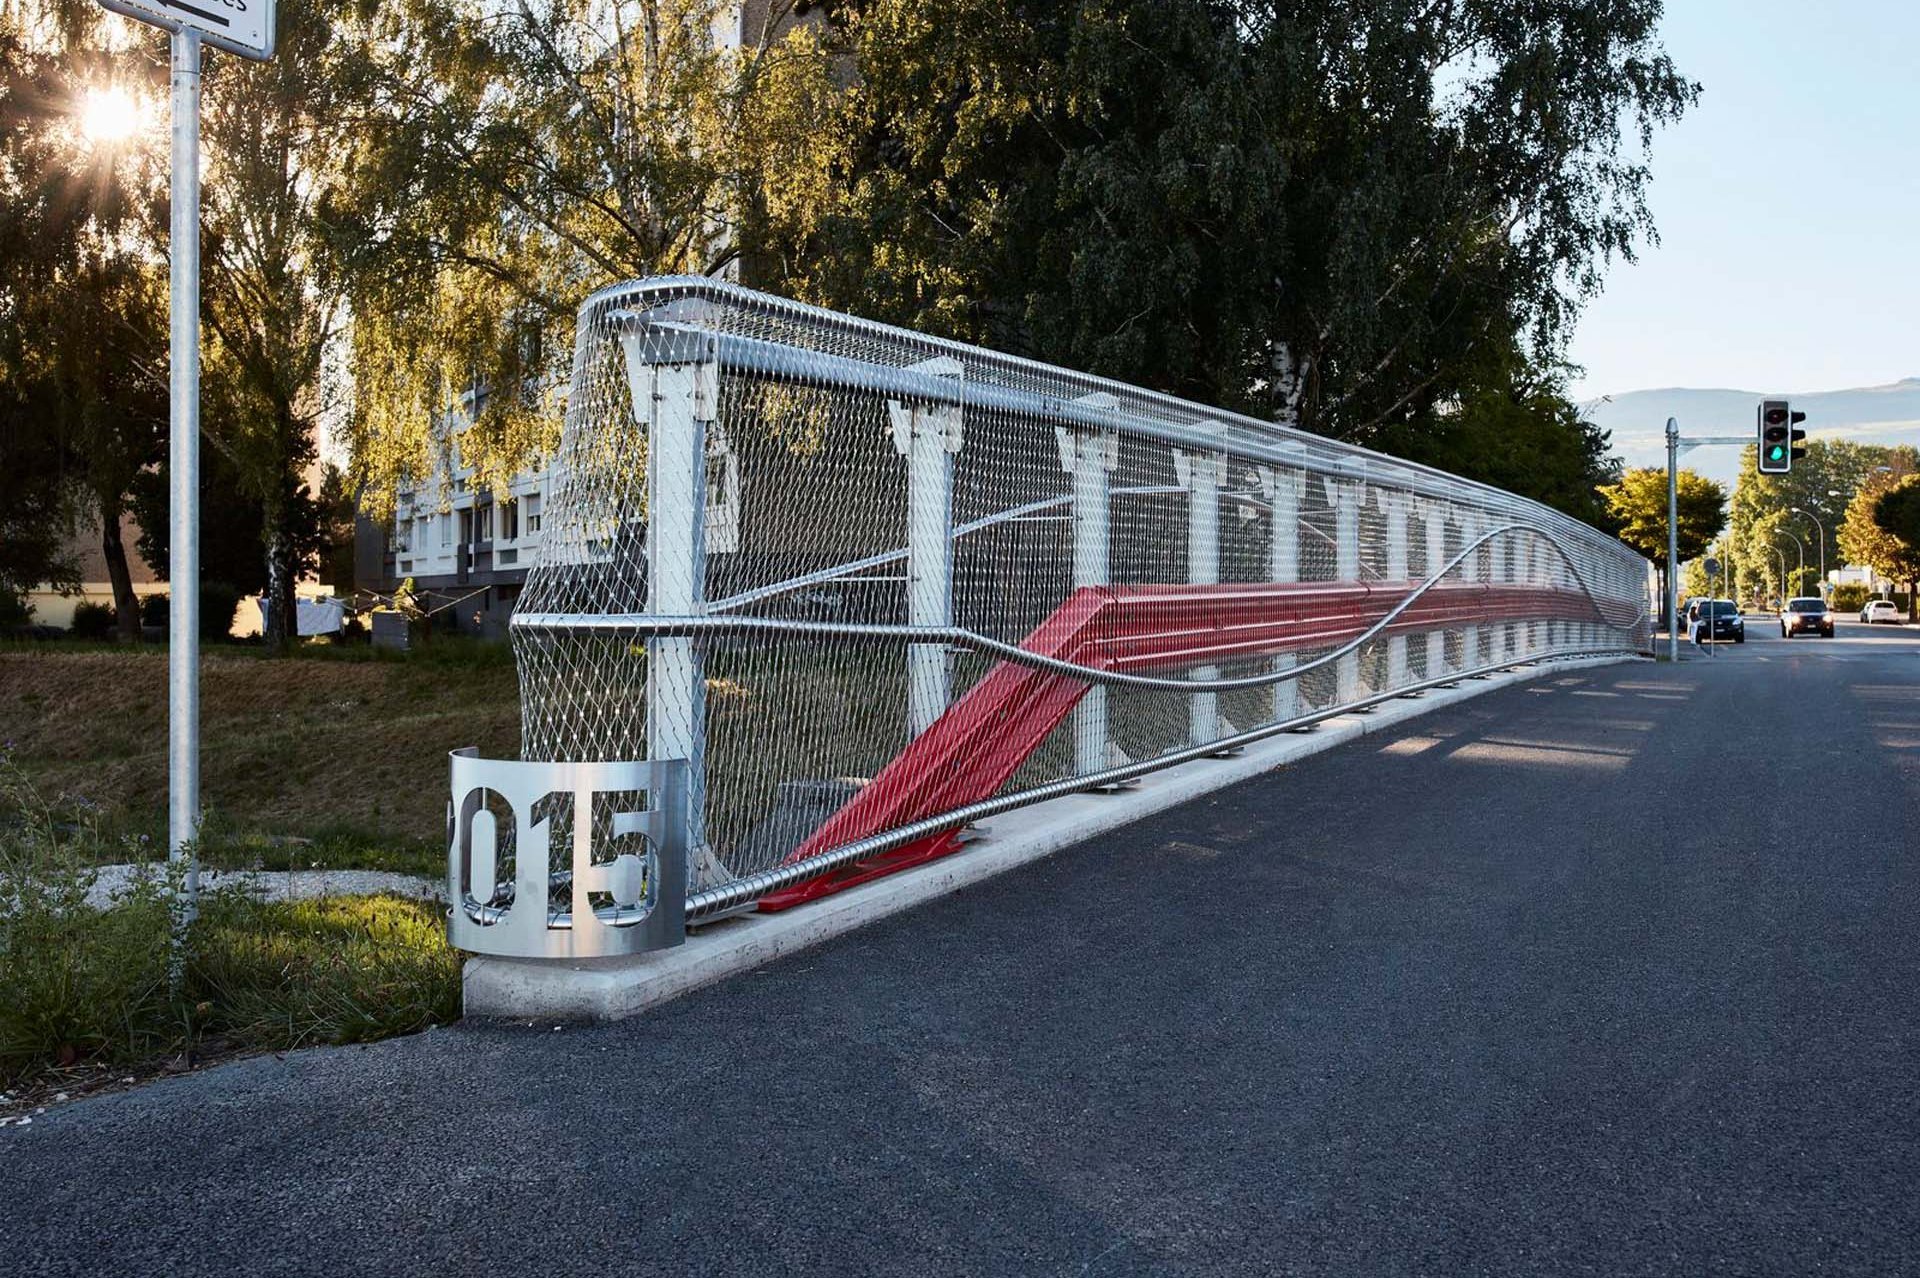 Webnet covers the railings on both sides of the bridge. It serves not only as a railing infill, but lets the striking red crash barriers and the curved steel railings shine.